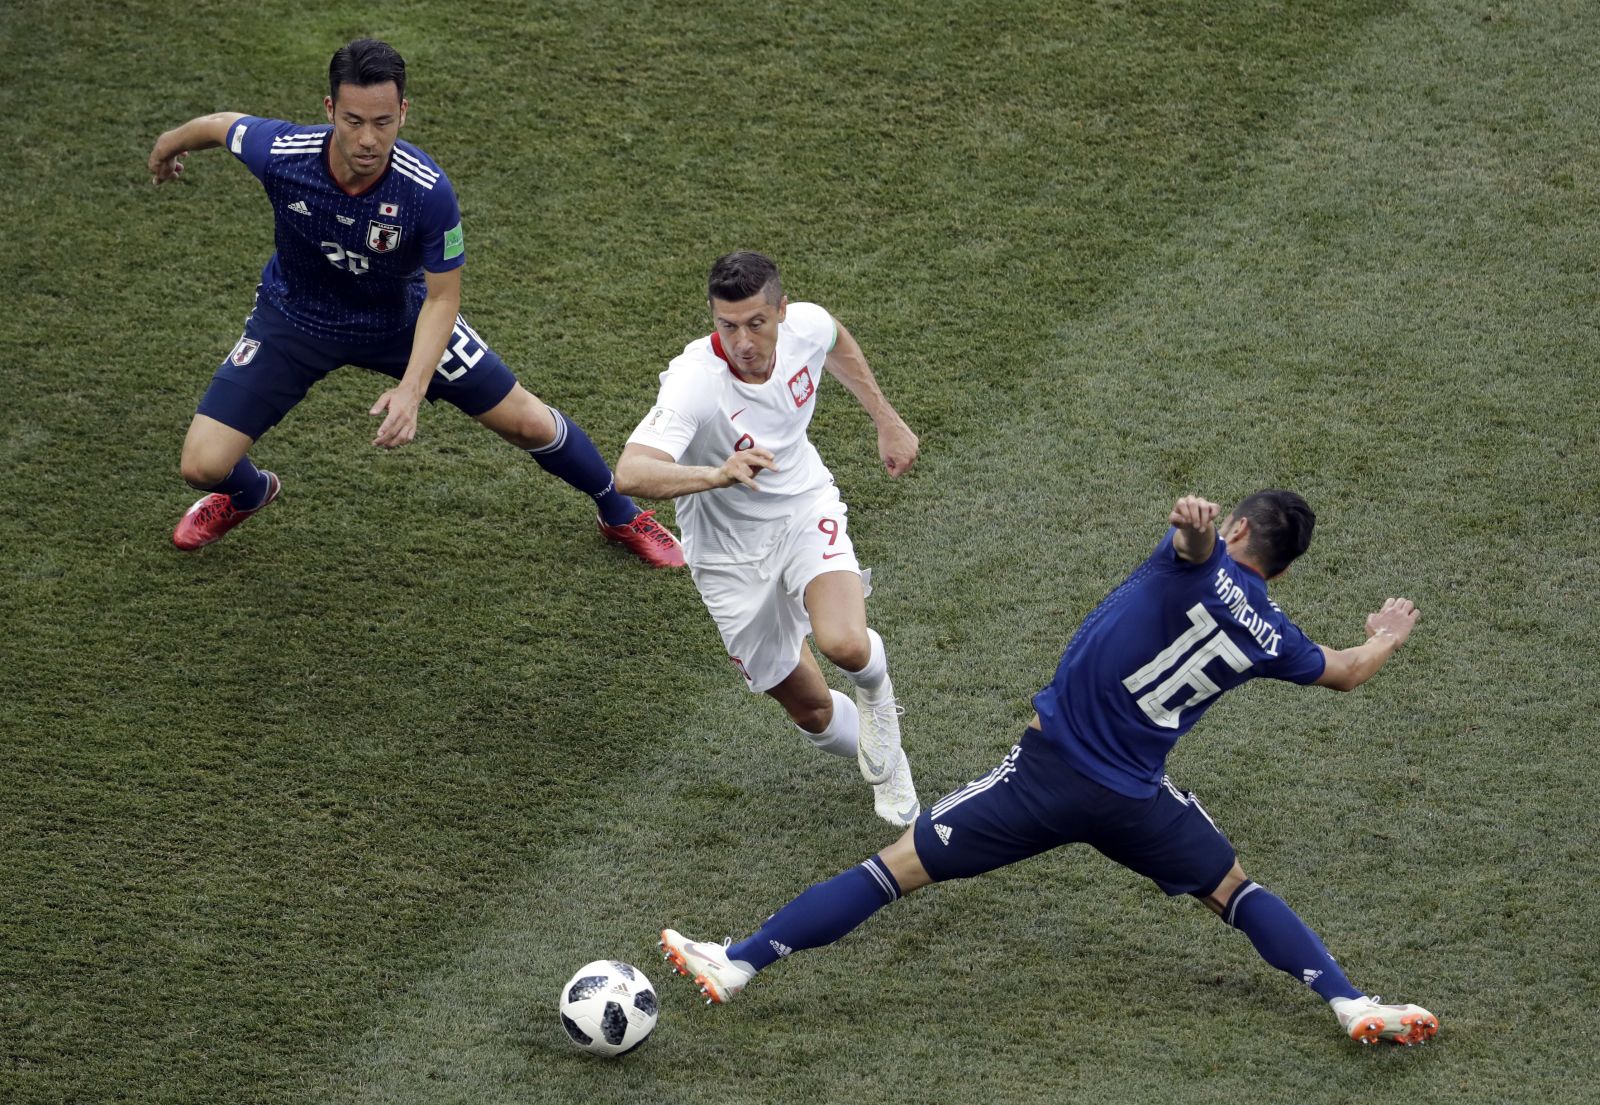 10 most compelling photos from the 2018 World Cup